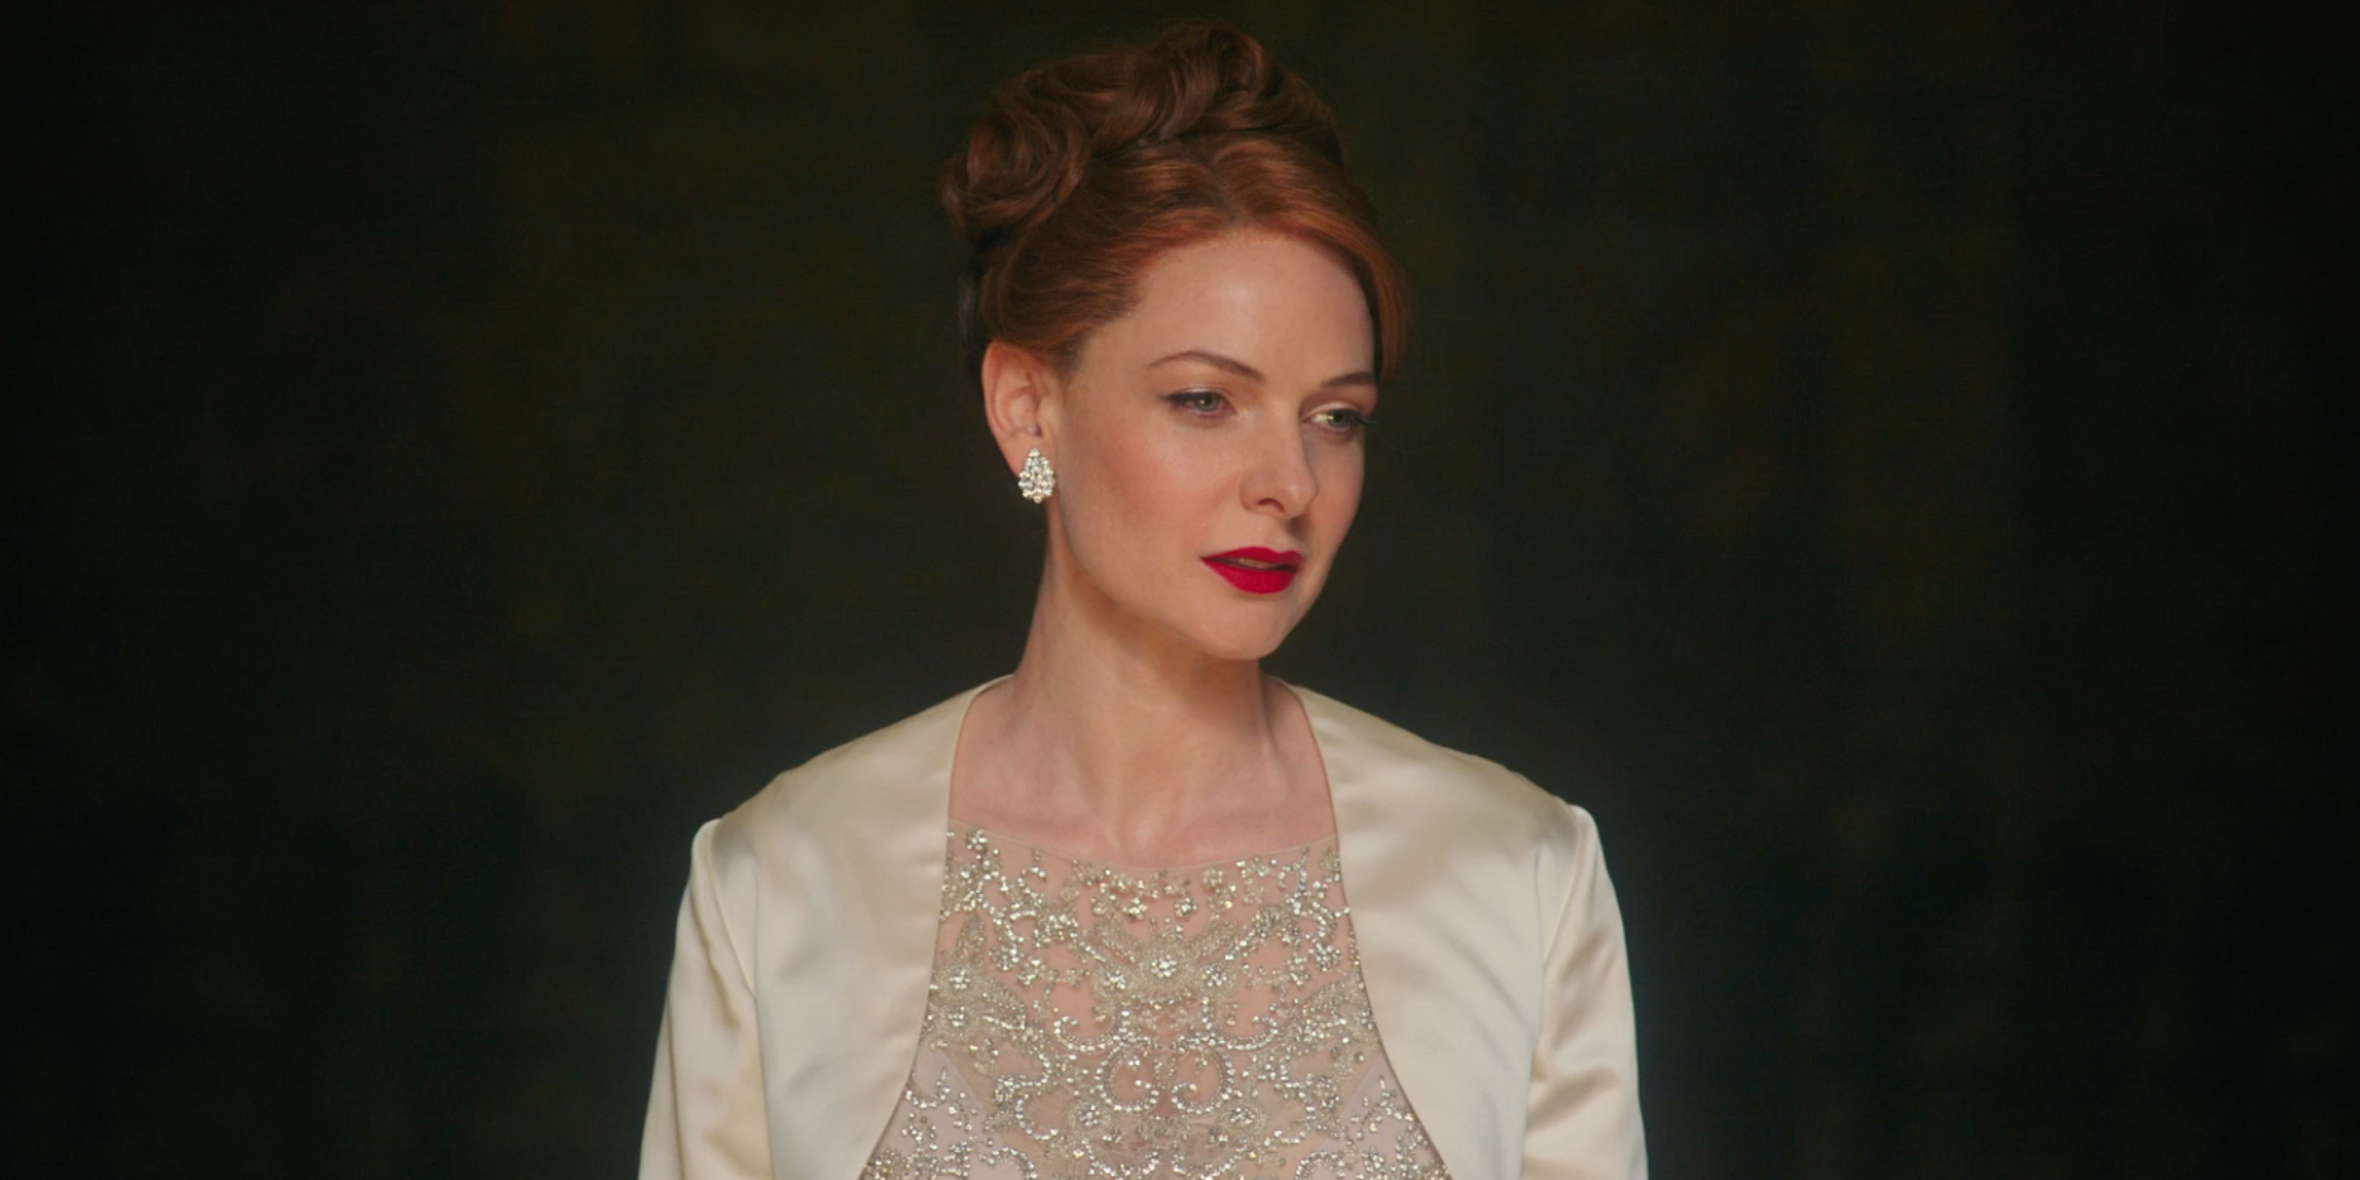 Jerry Lind (Rebecca Ferguson) performs a song while wearing a white dress.